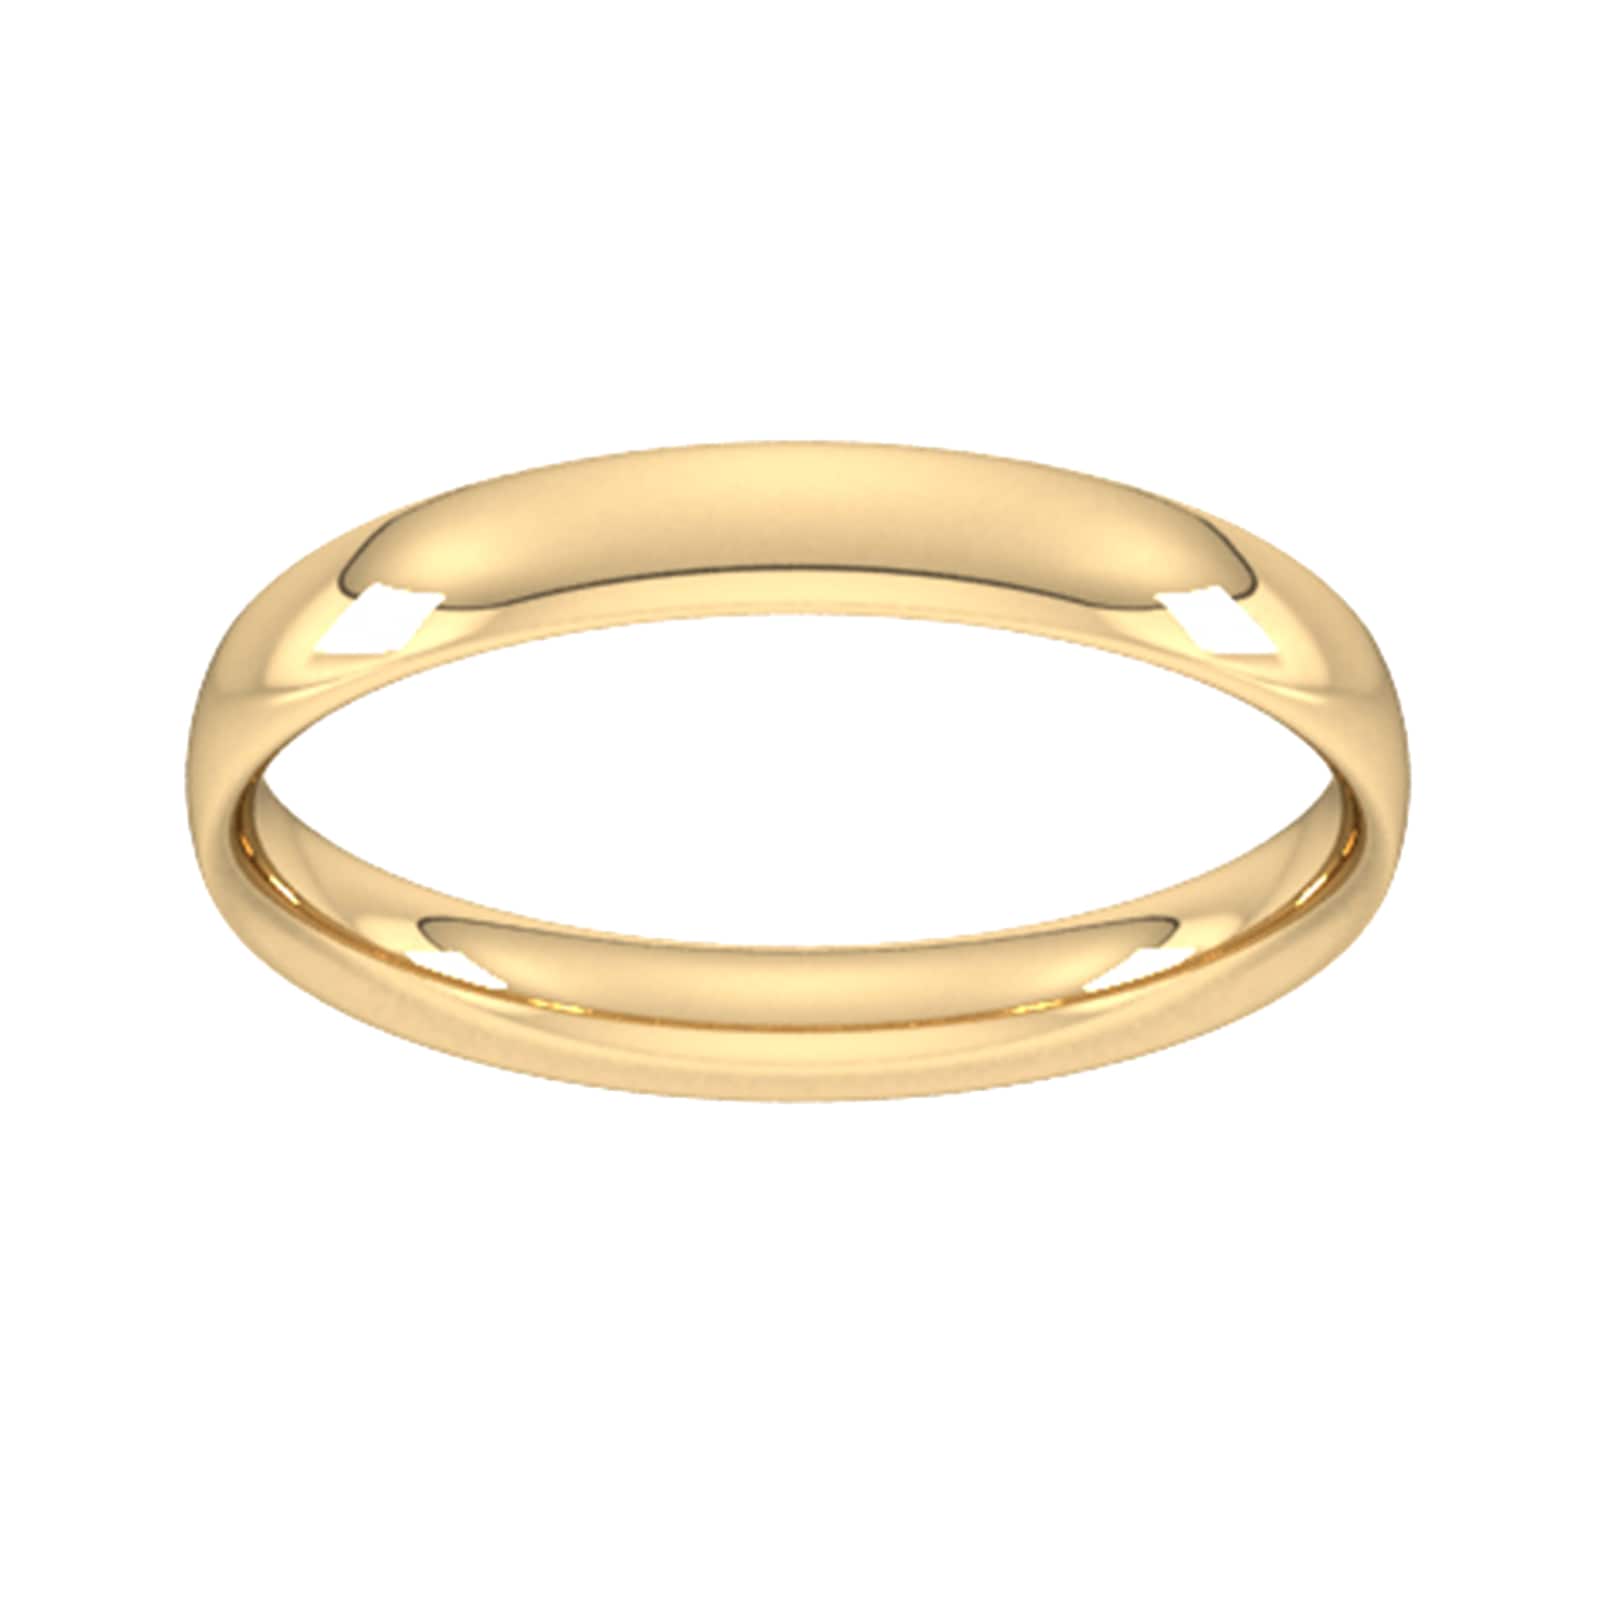 4mm Traditional Court Standard Wedding Ring In 9 Carat Yellow Gold - Ring Size T